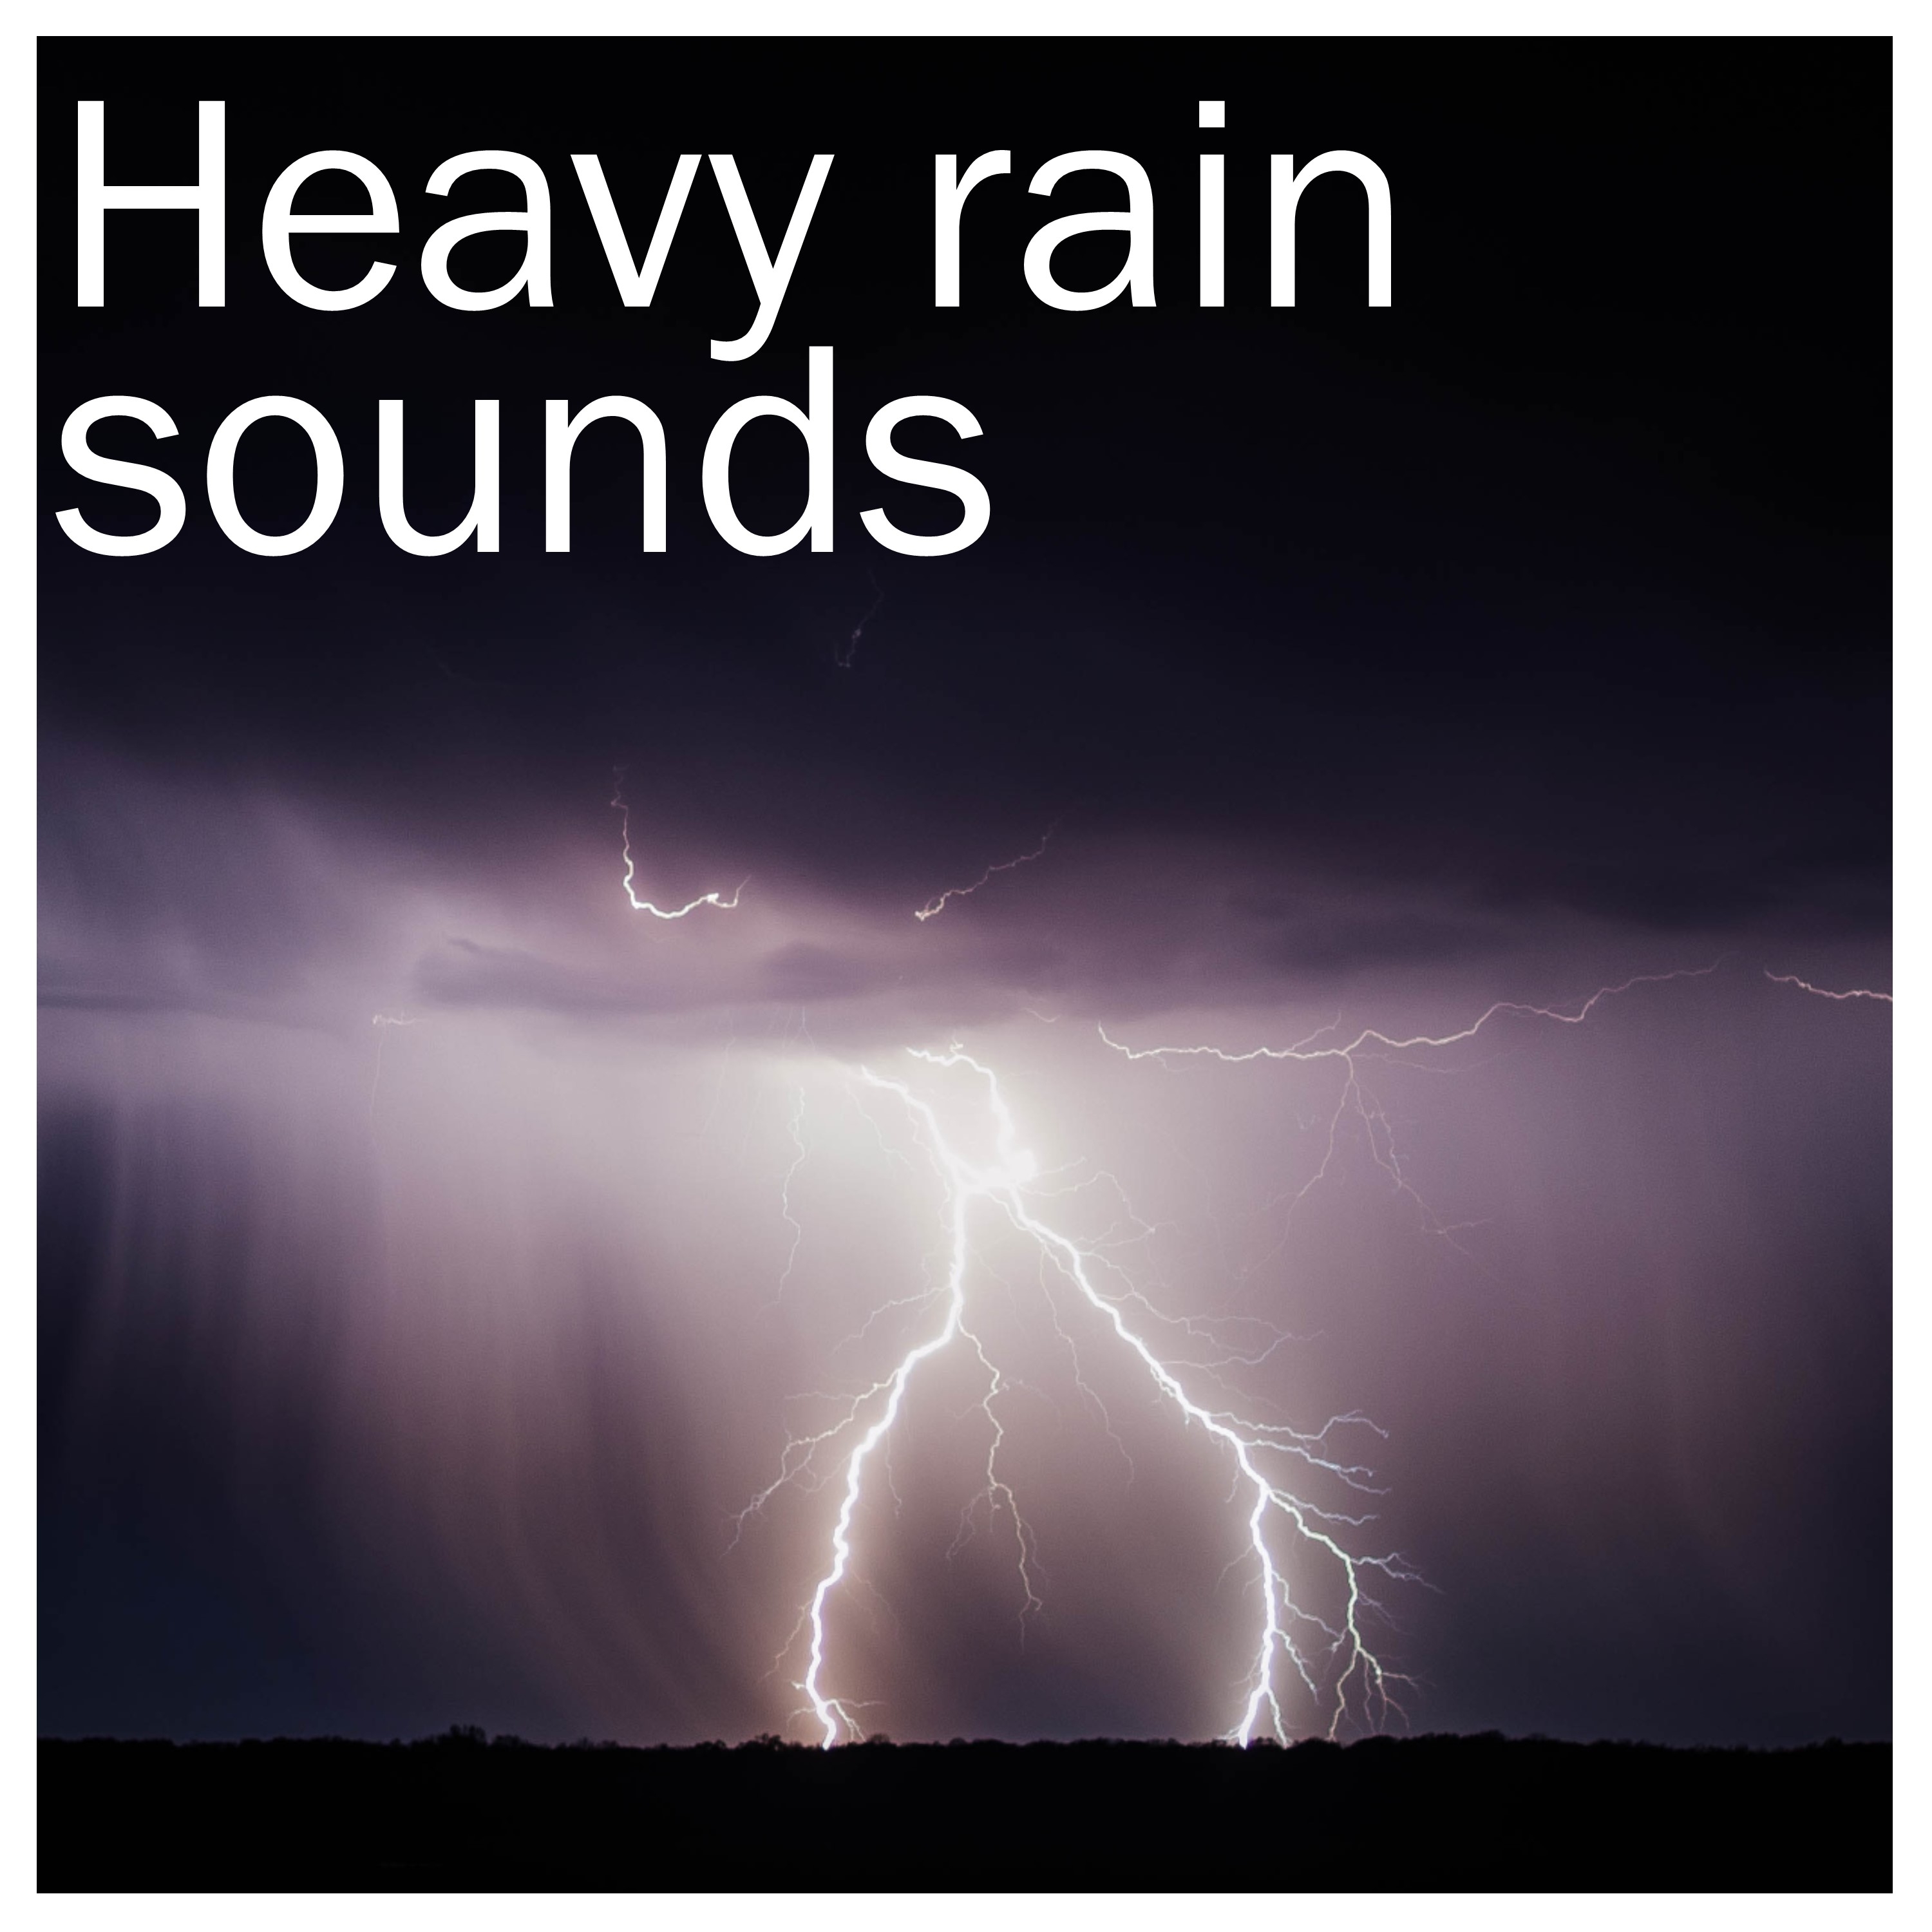 19 Thunderstorm and Heavy Rain Nature Sounds